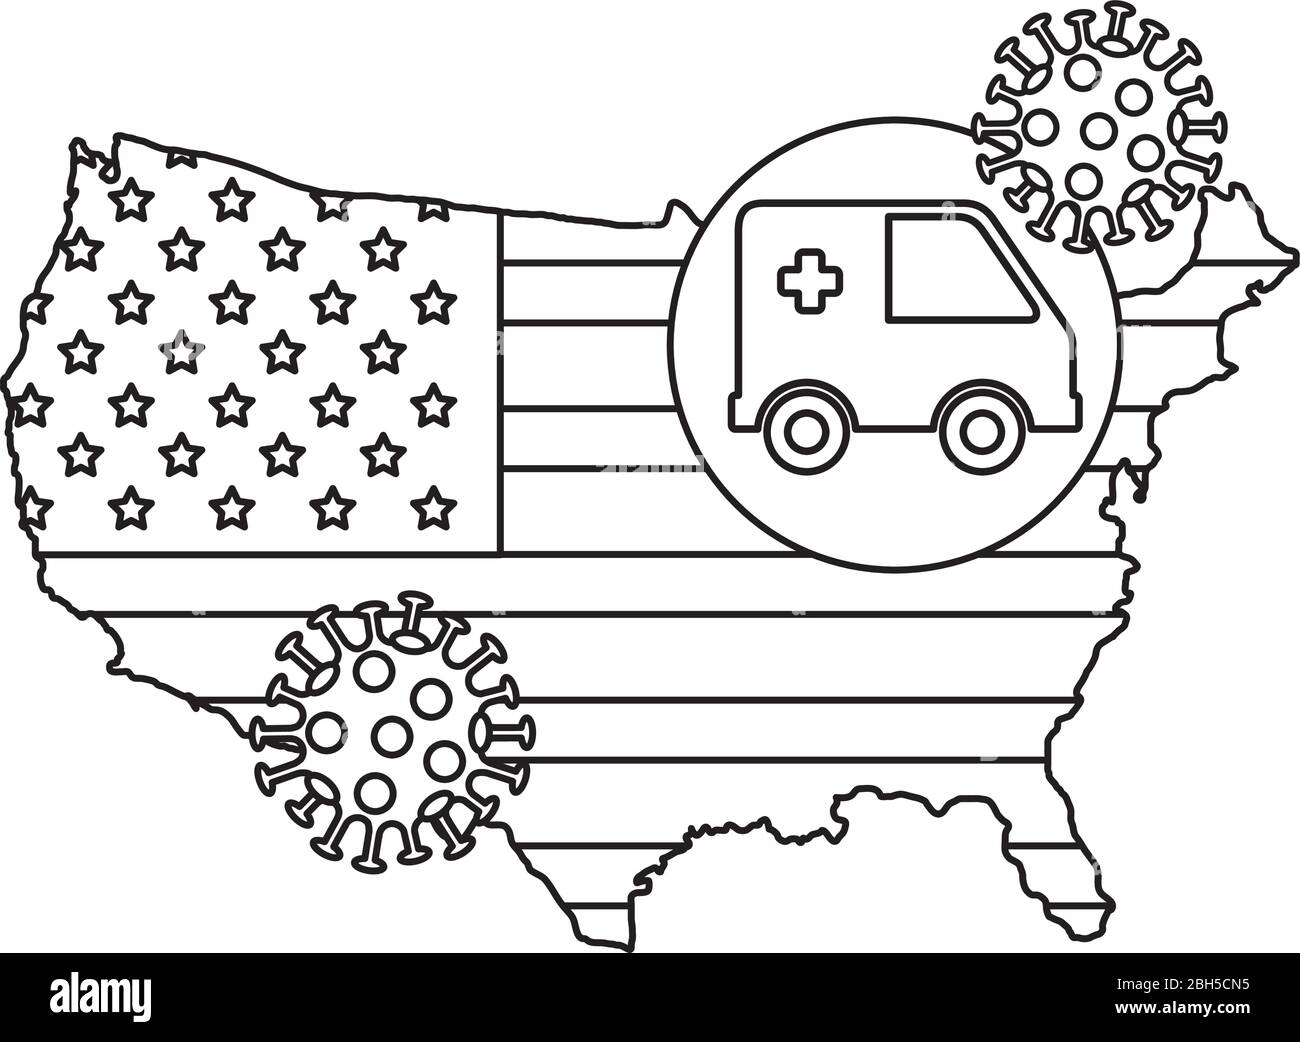 map of usa with ambulance and particles covid 19 Stock Vector